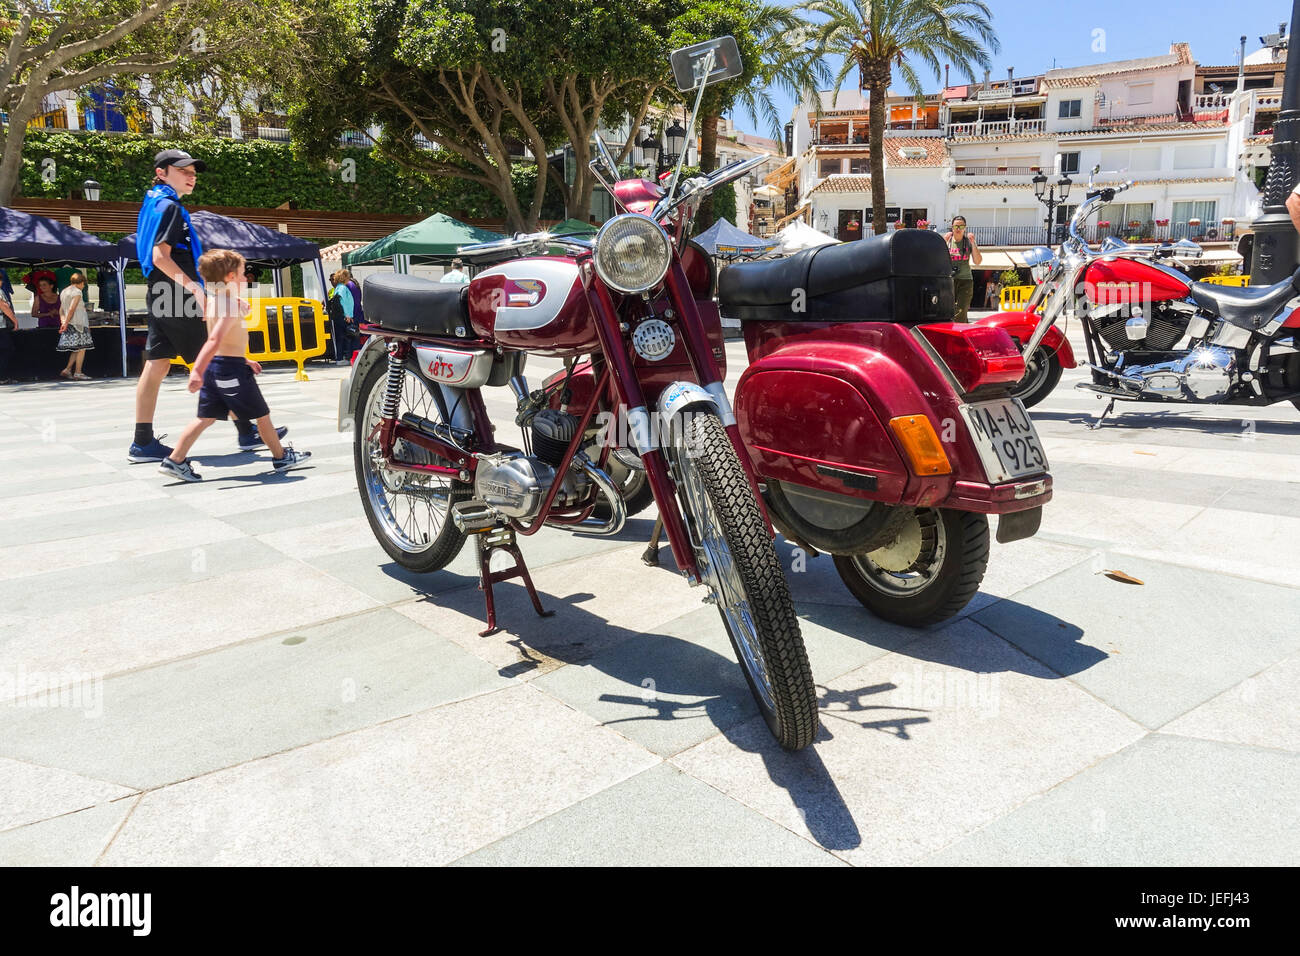 Motor ducati 48 ts, Classic bike on display at a classic motorcycle meeting in Mijas, Andalusia, Spain. Stock Photo